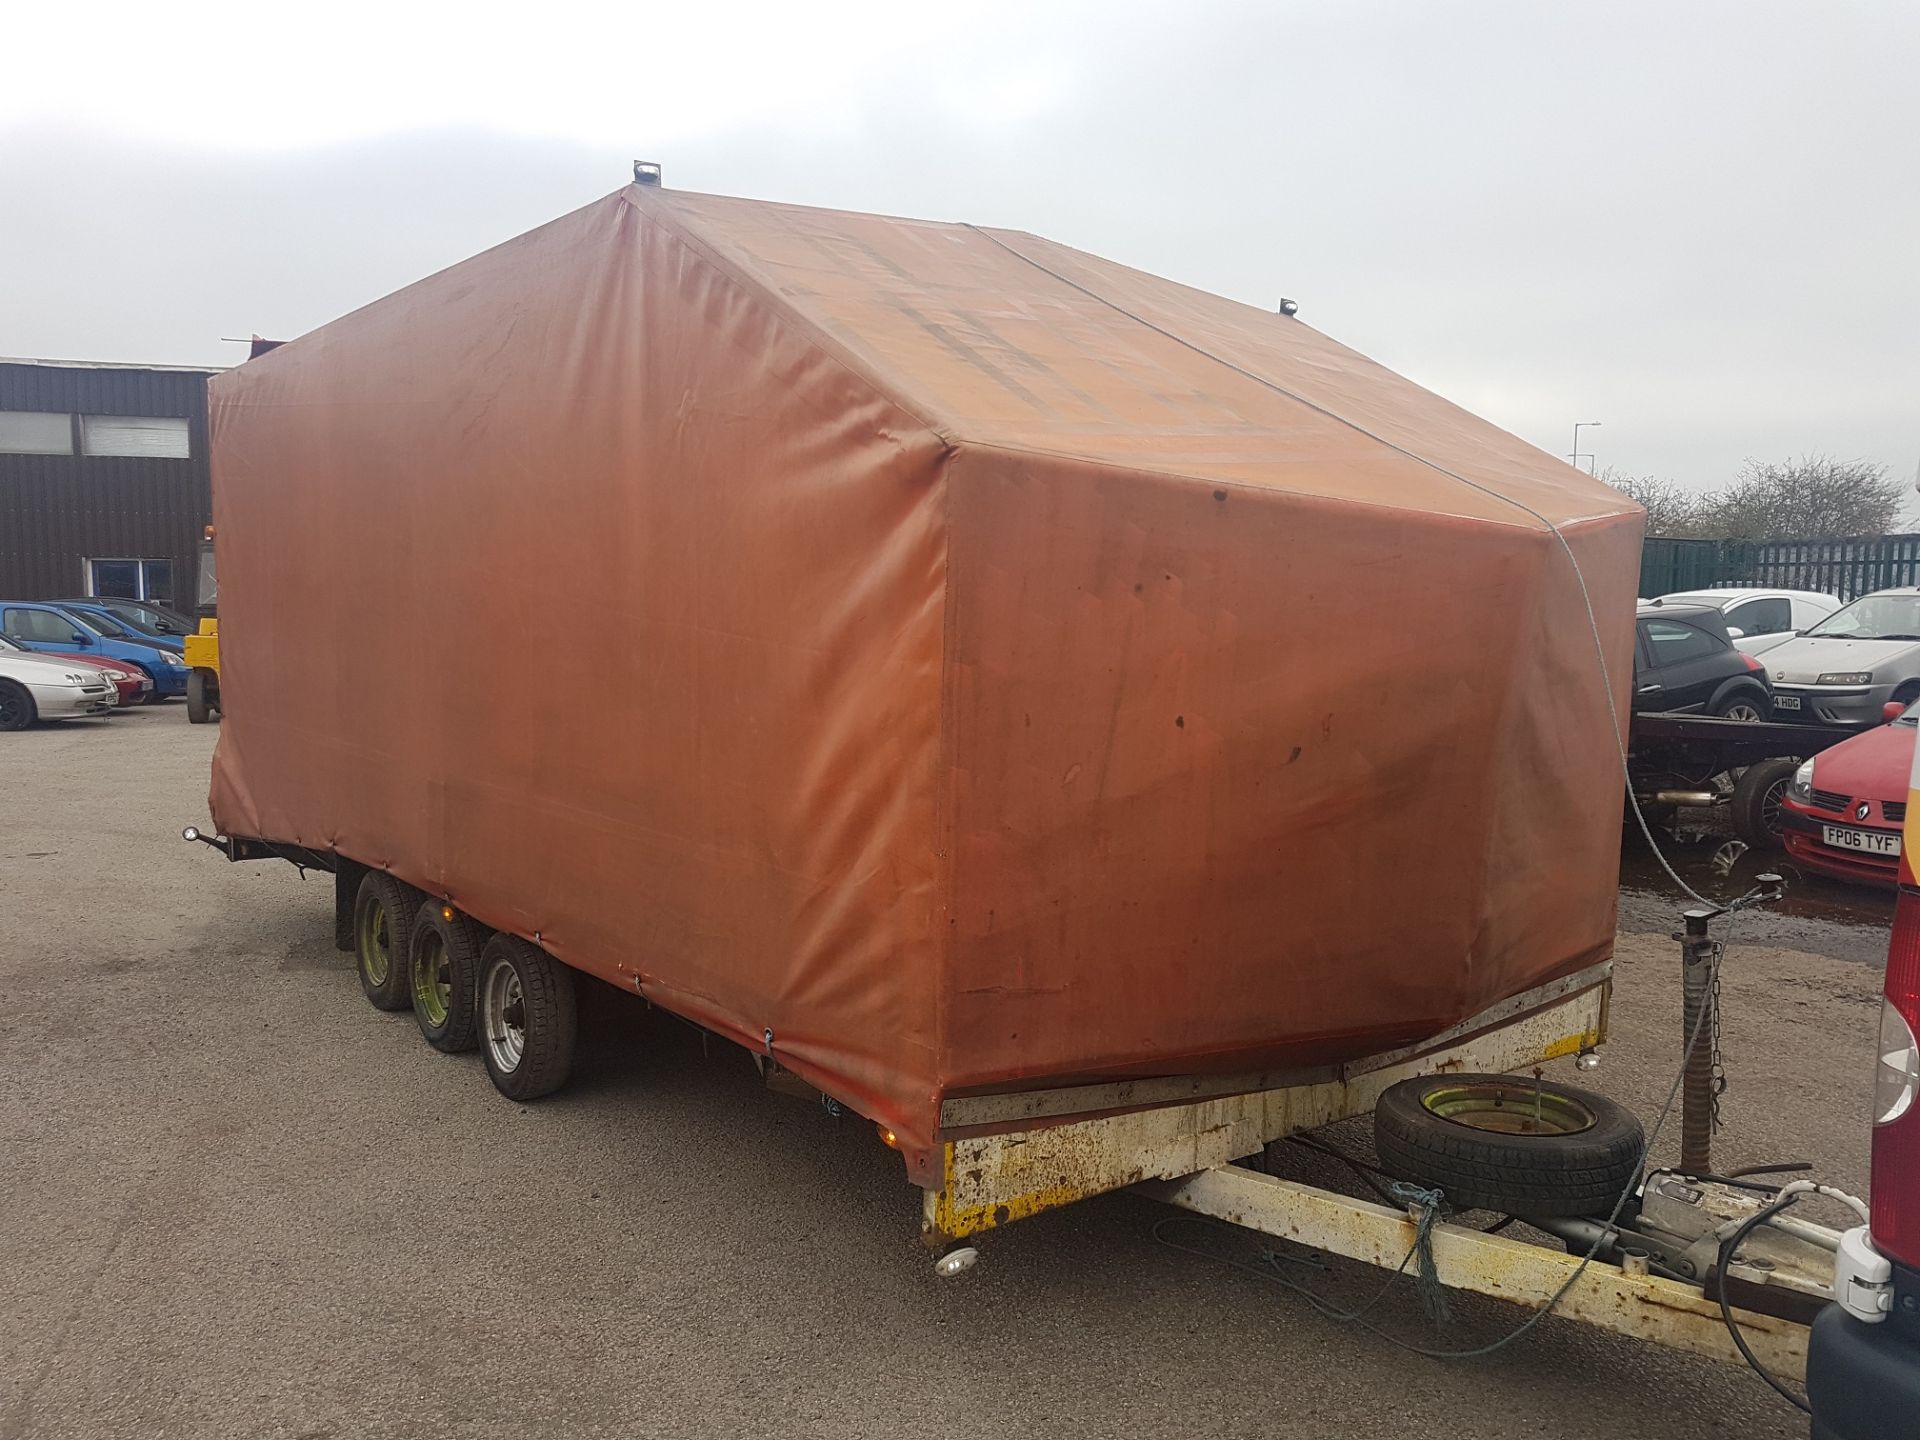 TRI-AXLE BEAVER-TAIL CAR TRANSPORTER COVERED TRAILER - 5.5 METRE BED LENGTH!  *PLUS VAT*   CAN FIT A